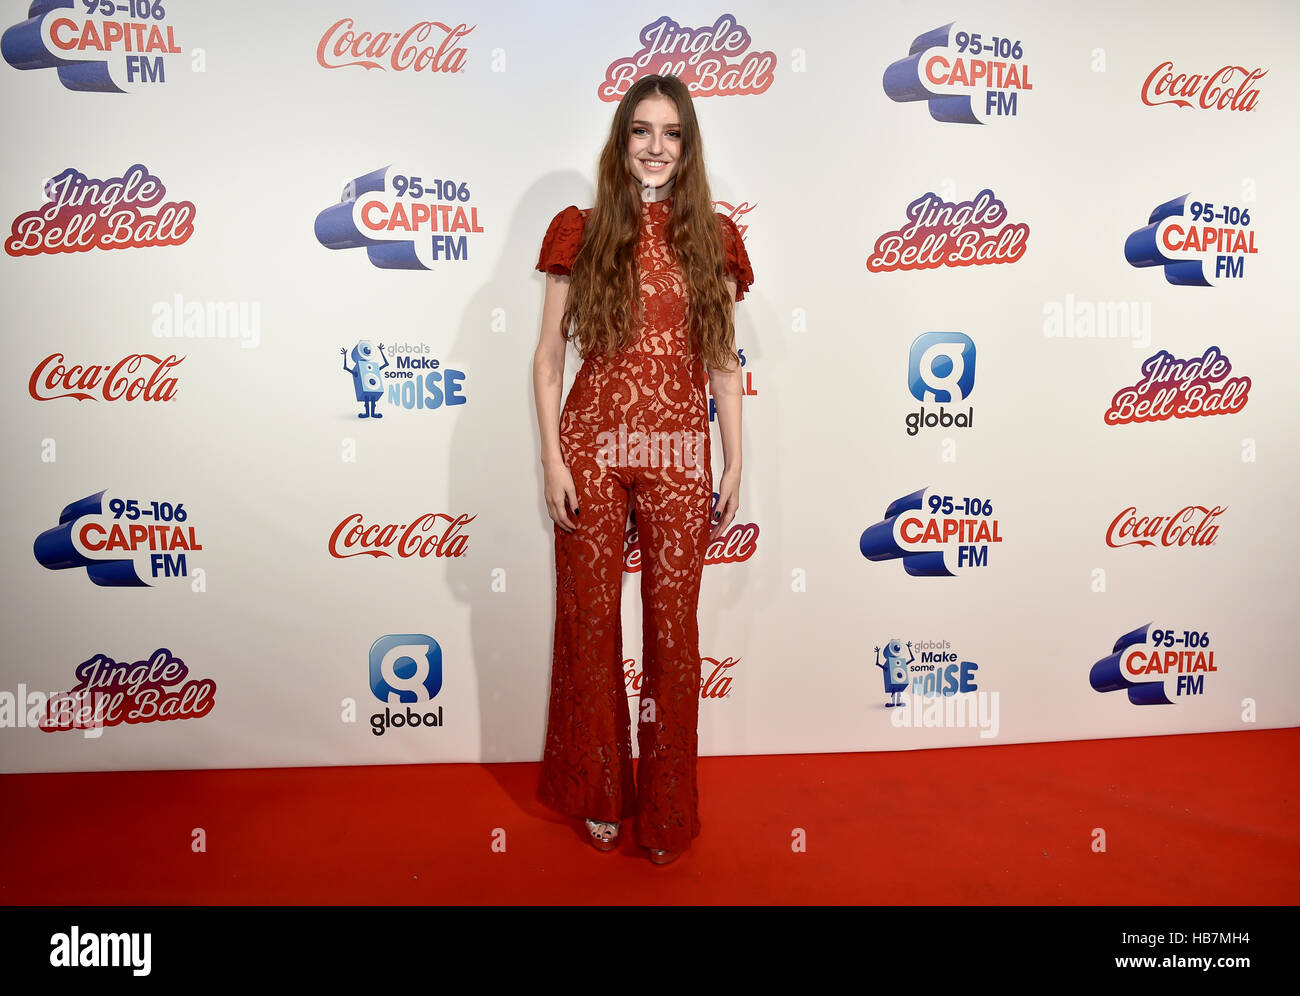 Birdy during Capital's Jingle Bell Ball with Coca-Cola at London's O2 arena. Stock Photo